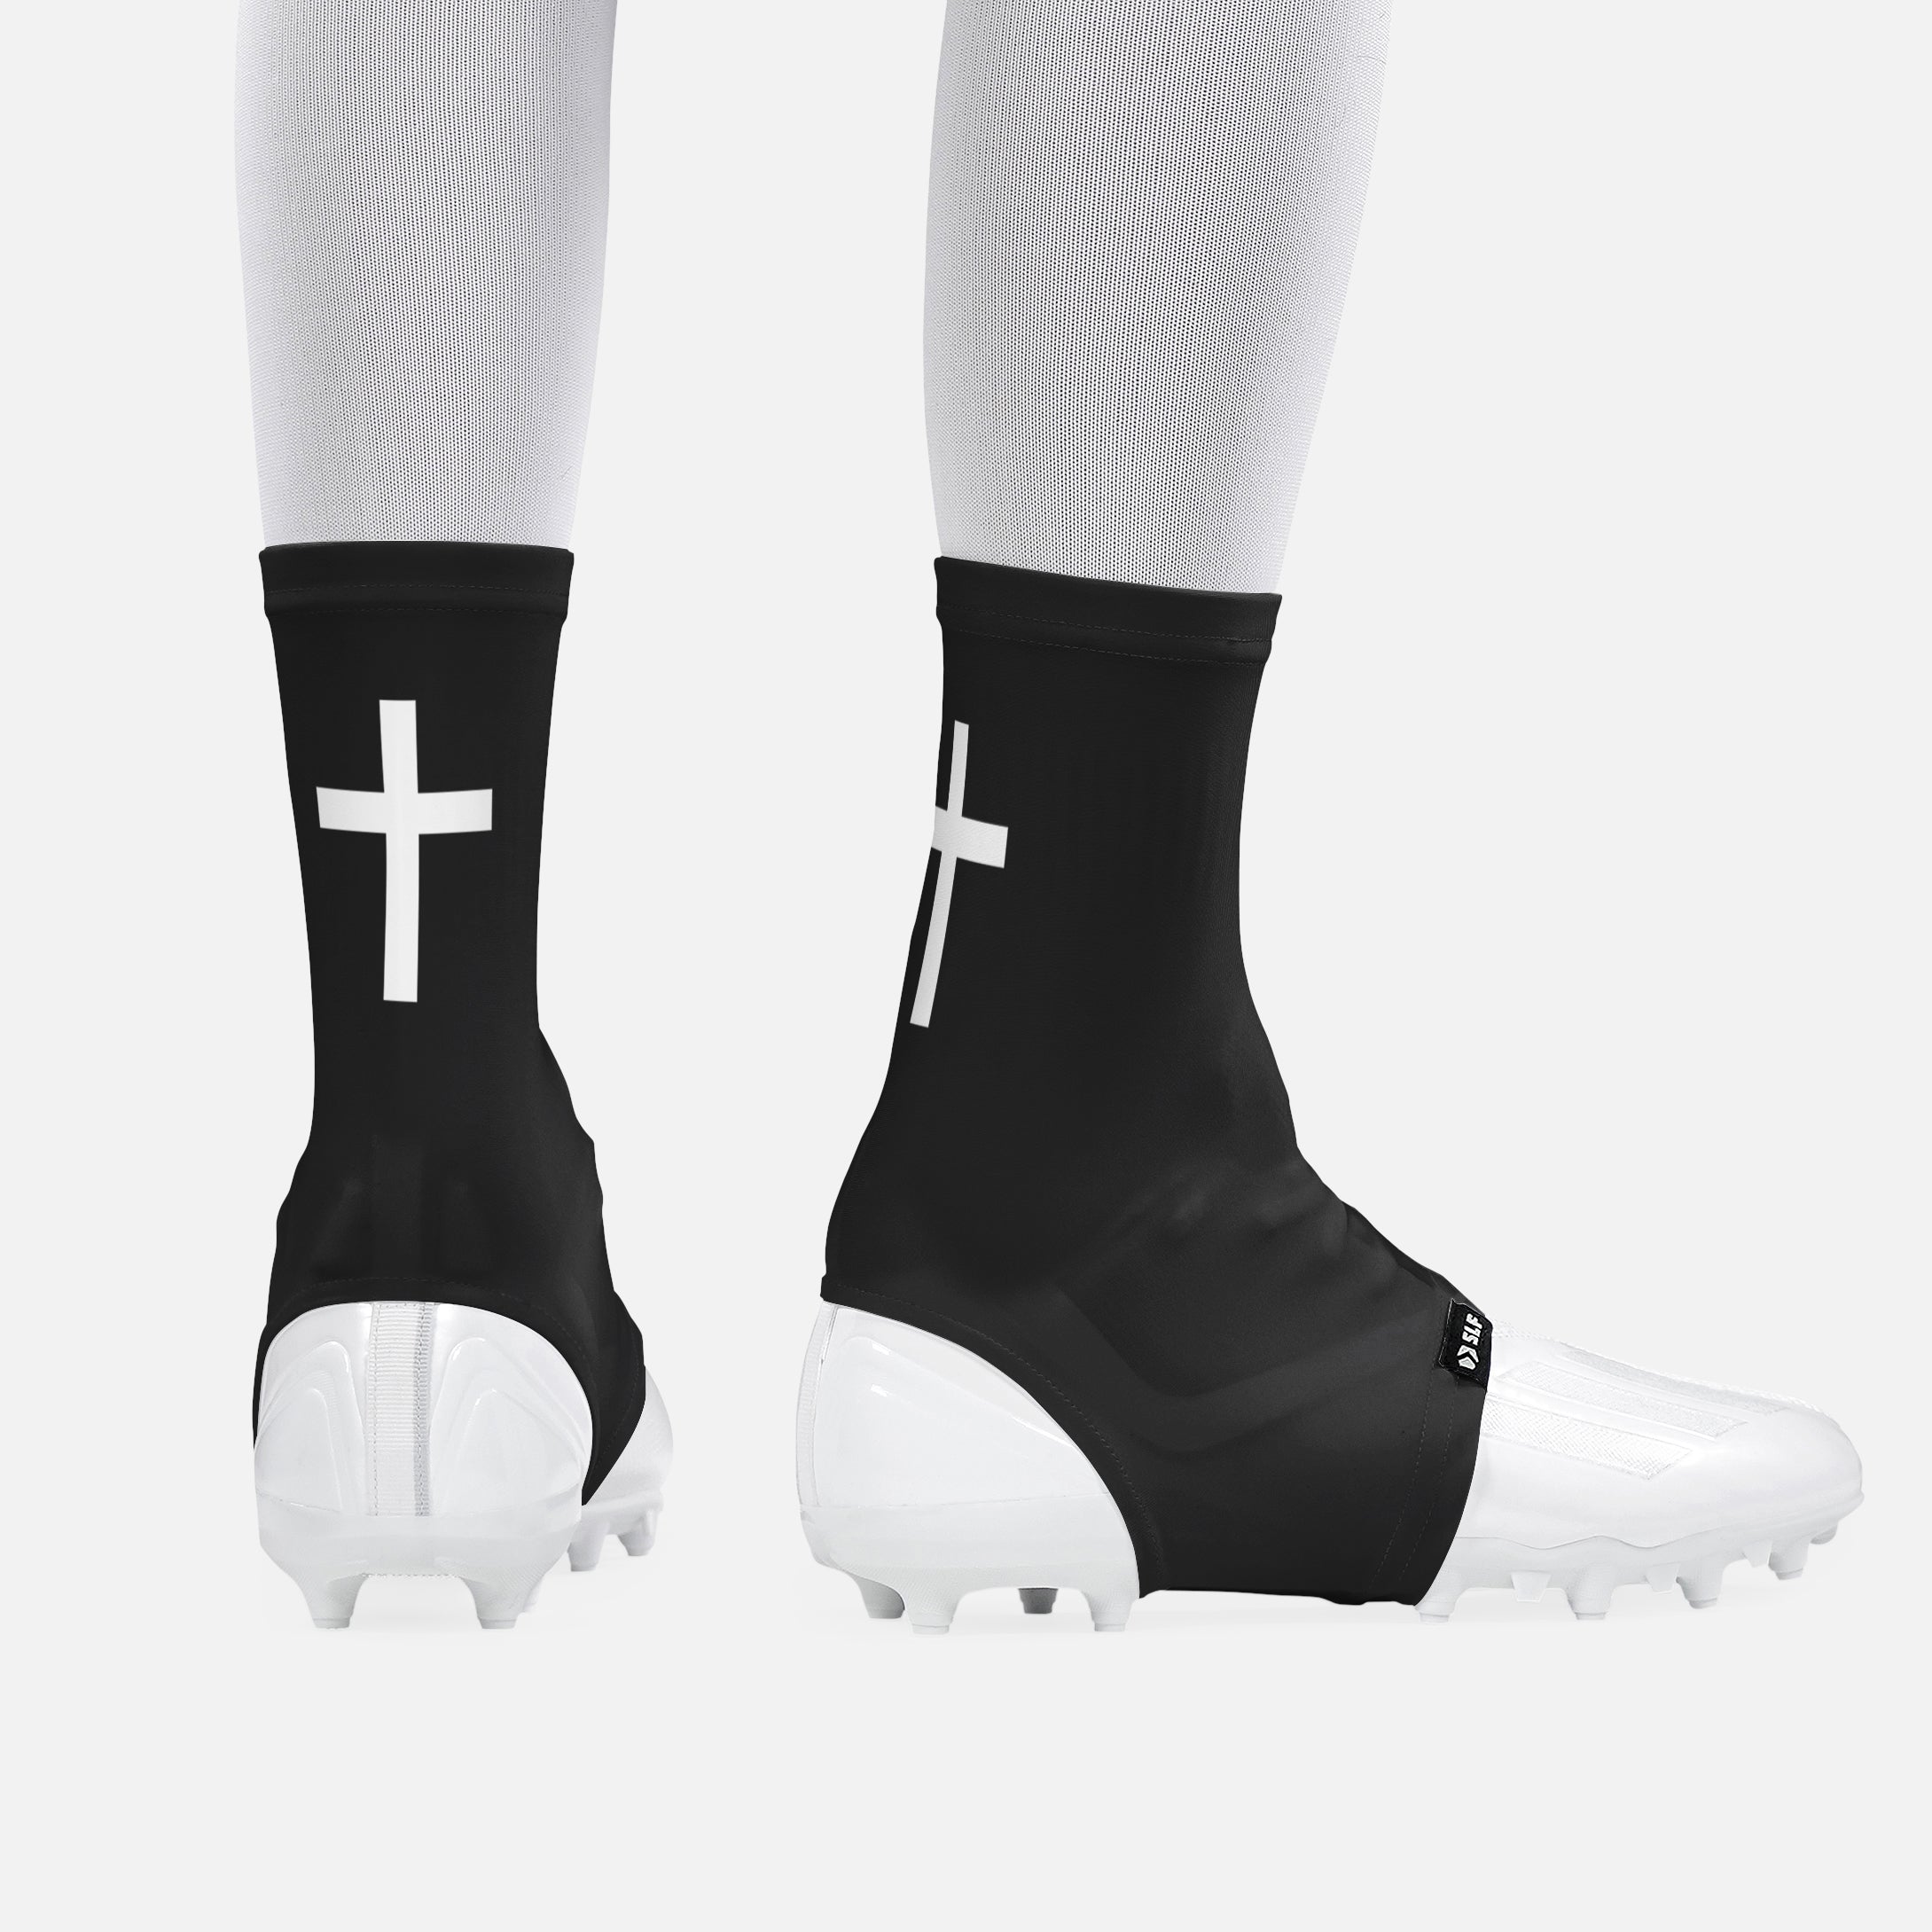  Gridiron Gladiator Cleat Covers - Football Spats